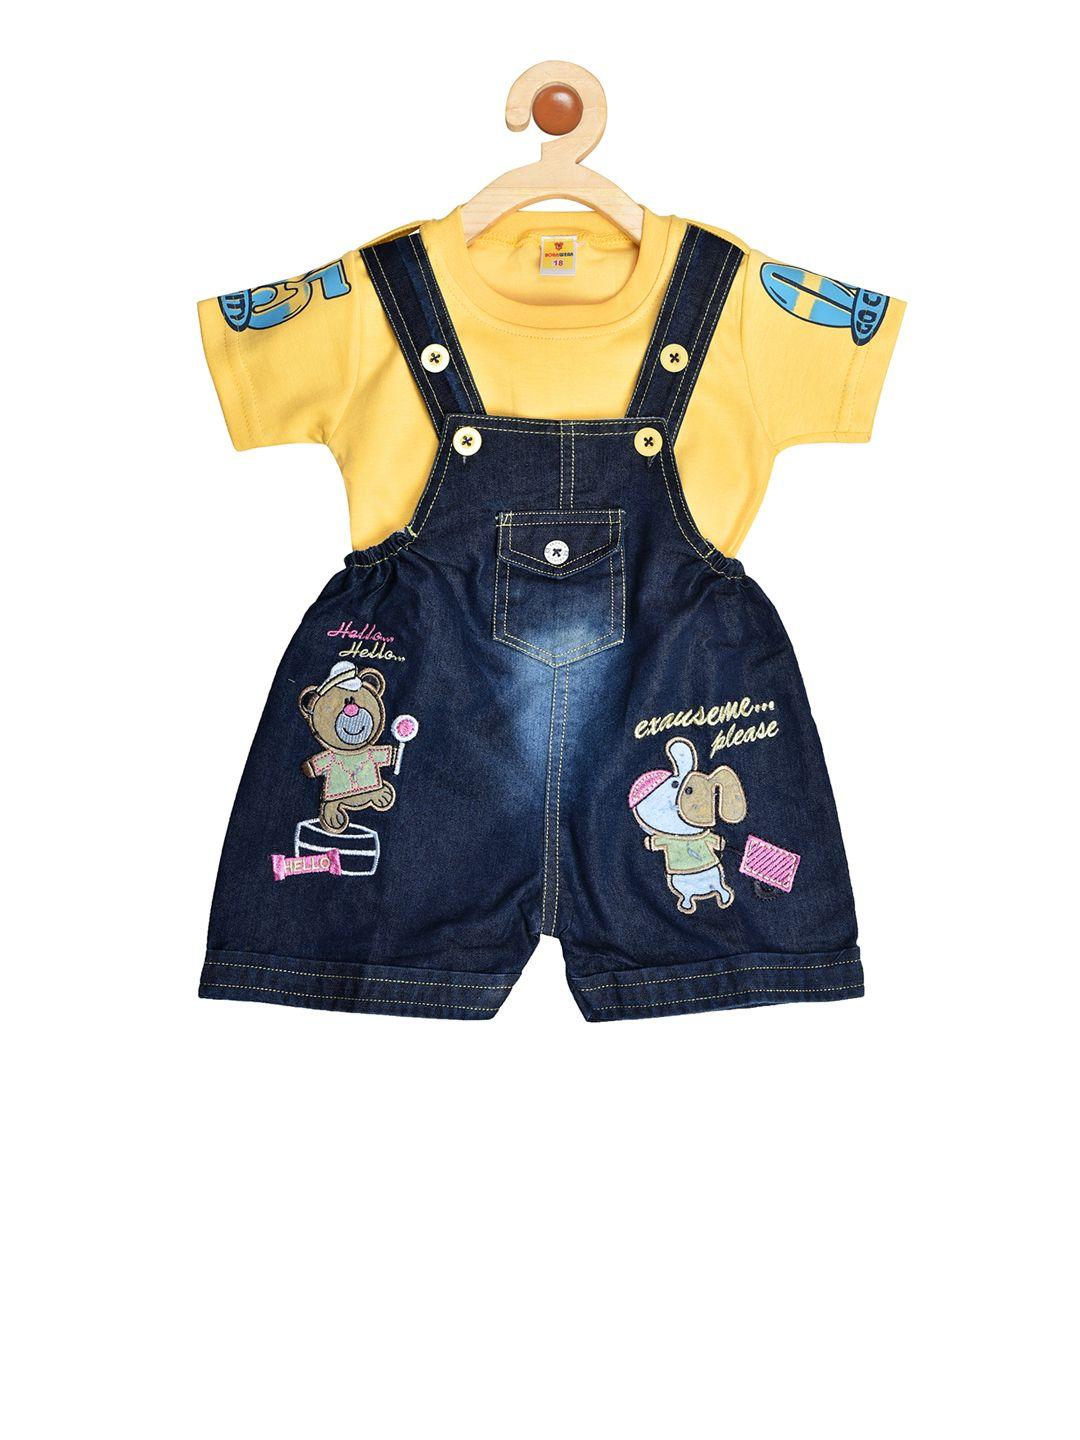 born wear unisex yellow & navy blue printed t-shirt with dungarees